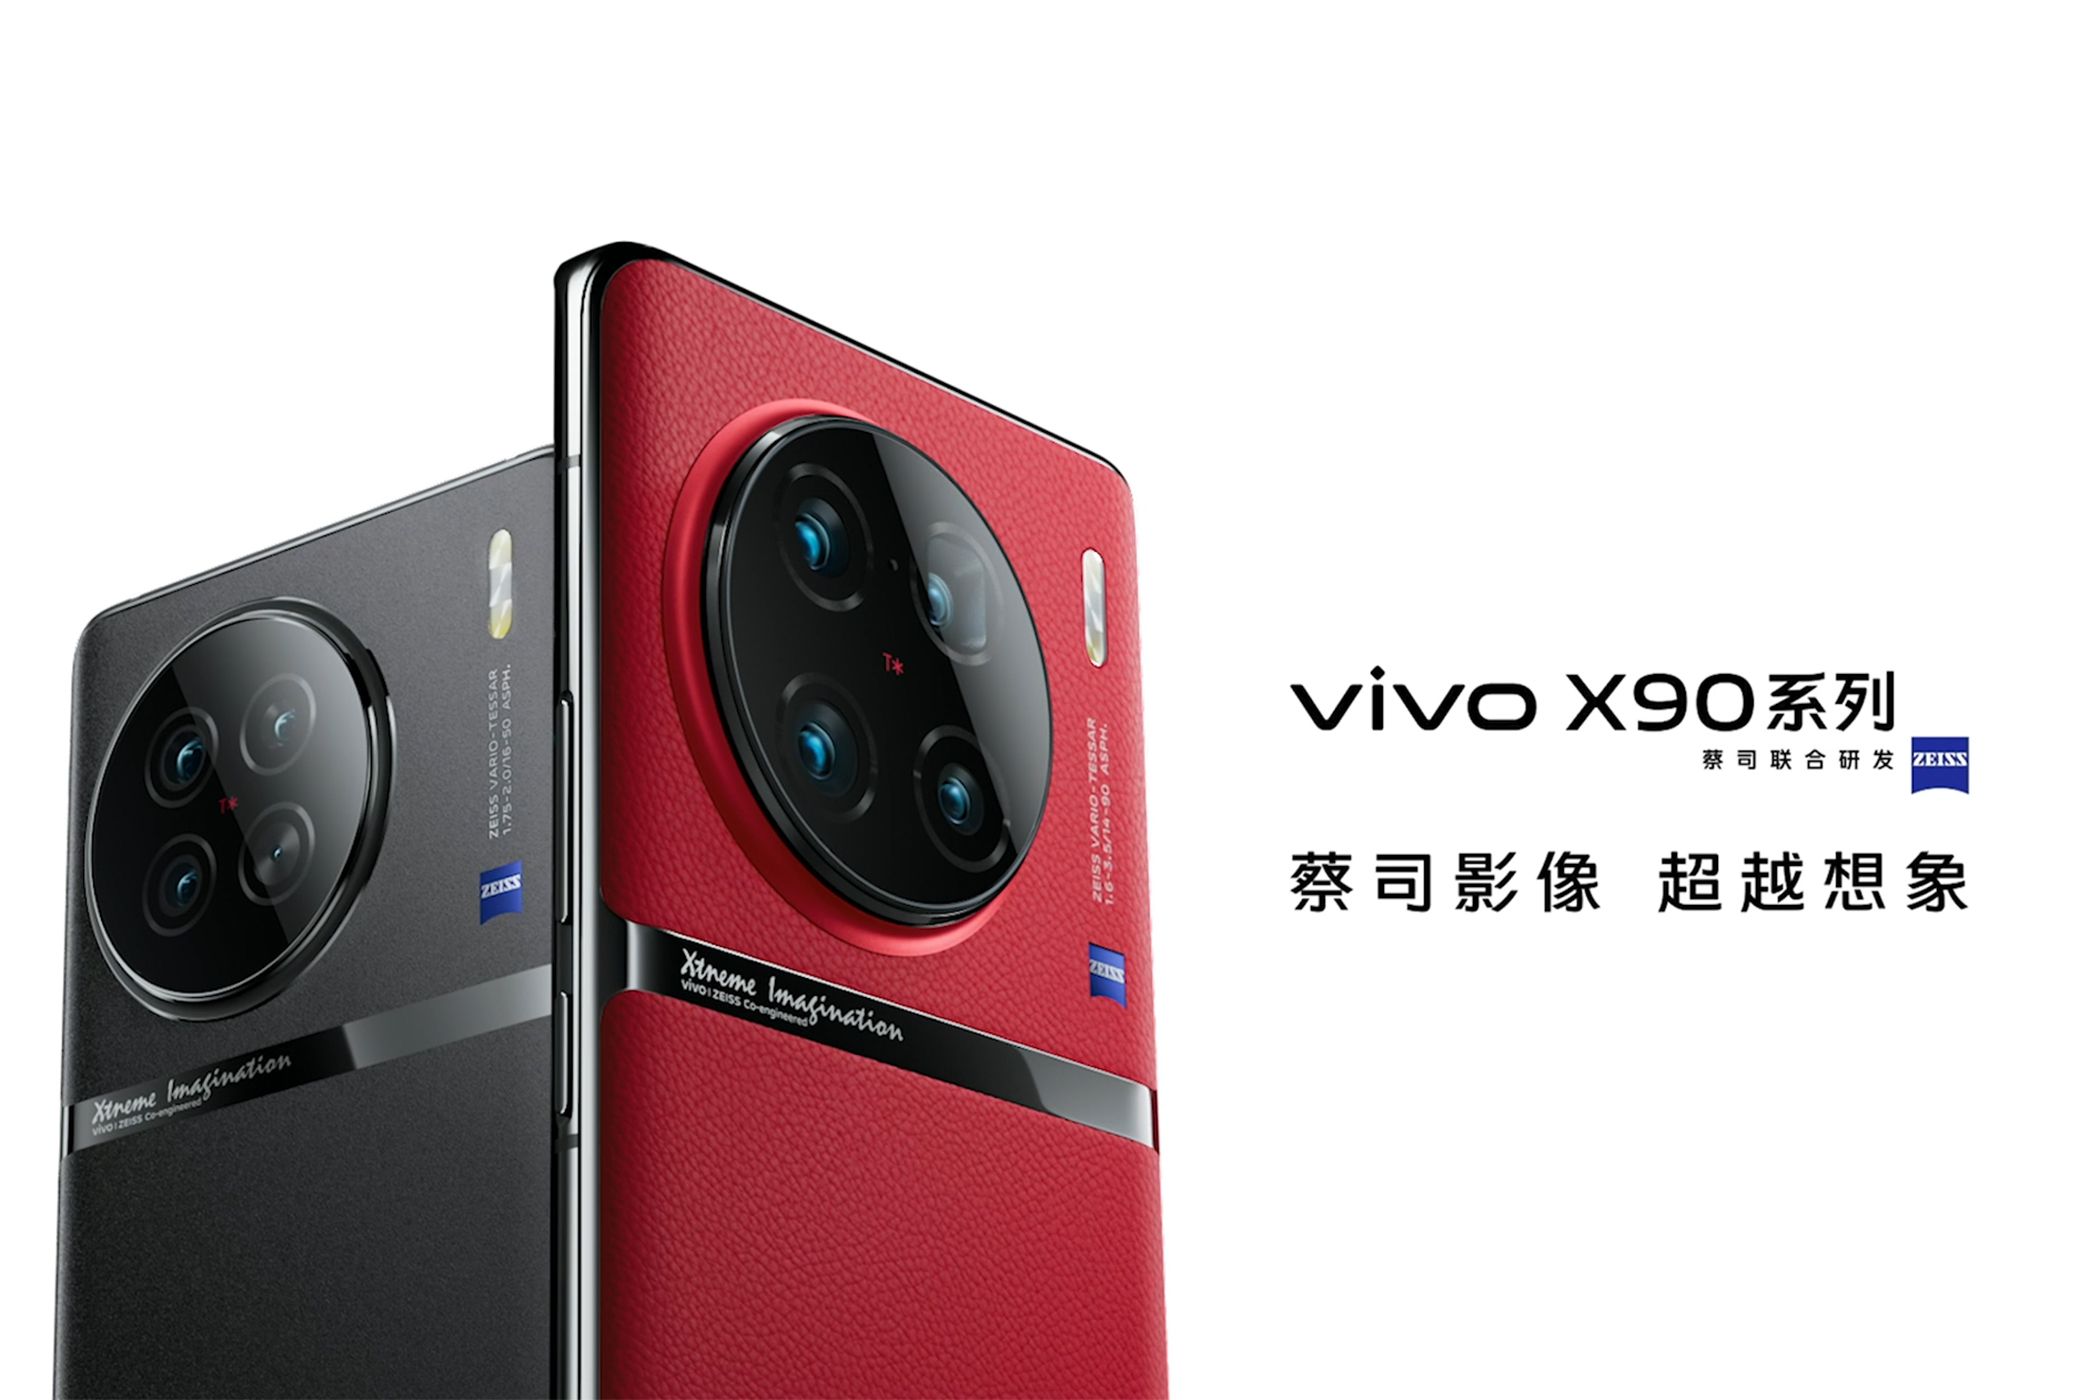 The Vivo X90 Pro Plus is the first phone to feature the Snapdragon